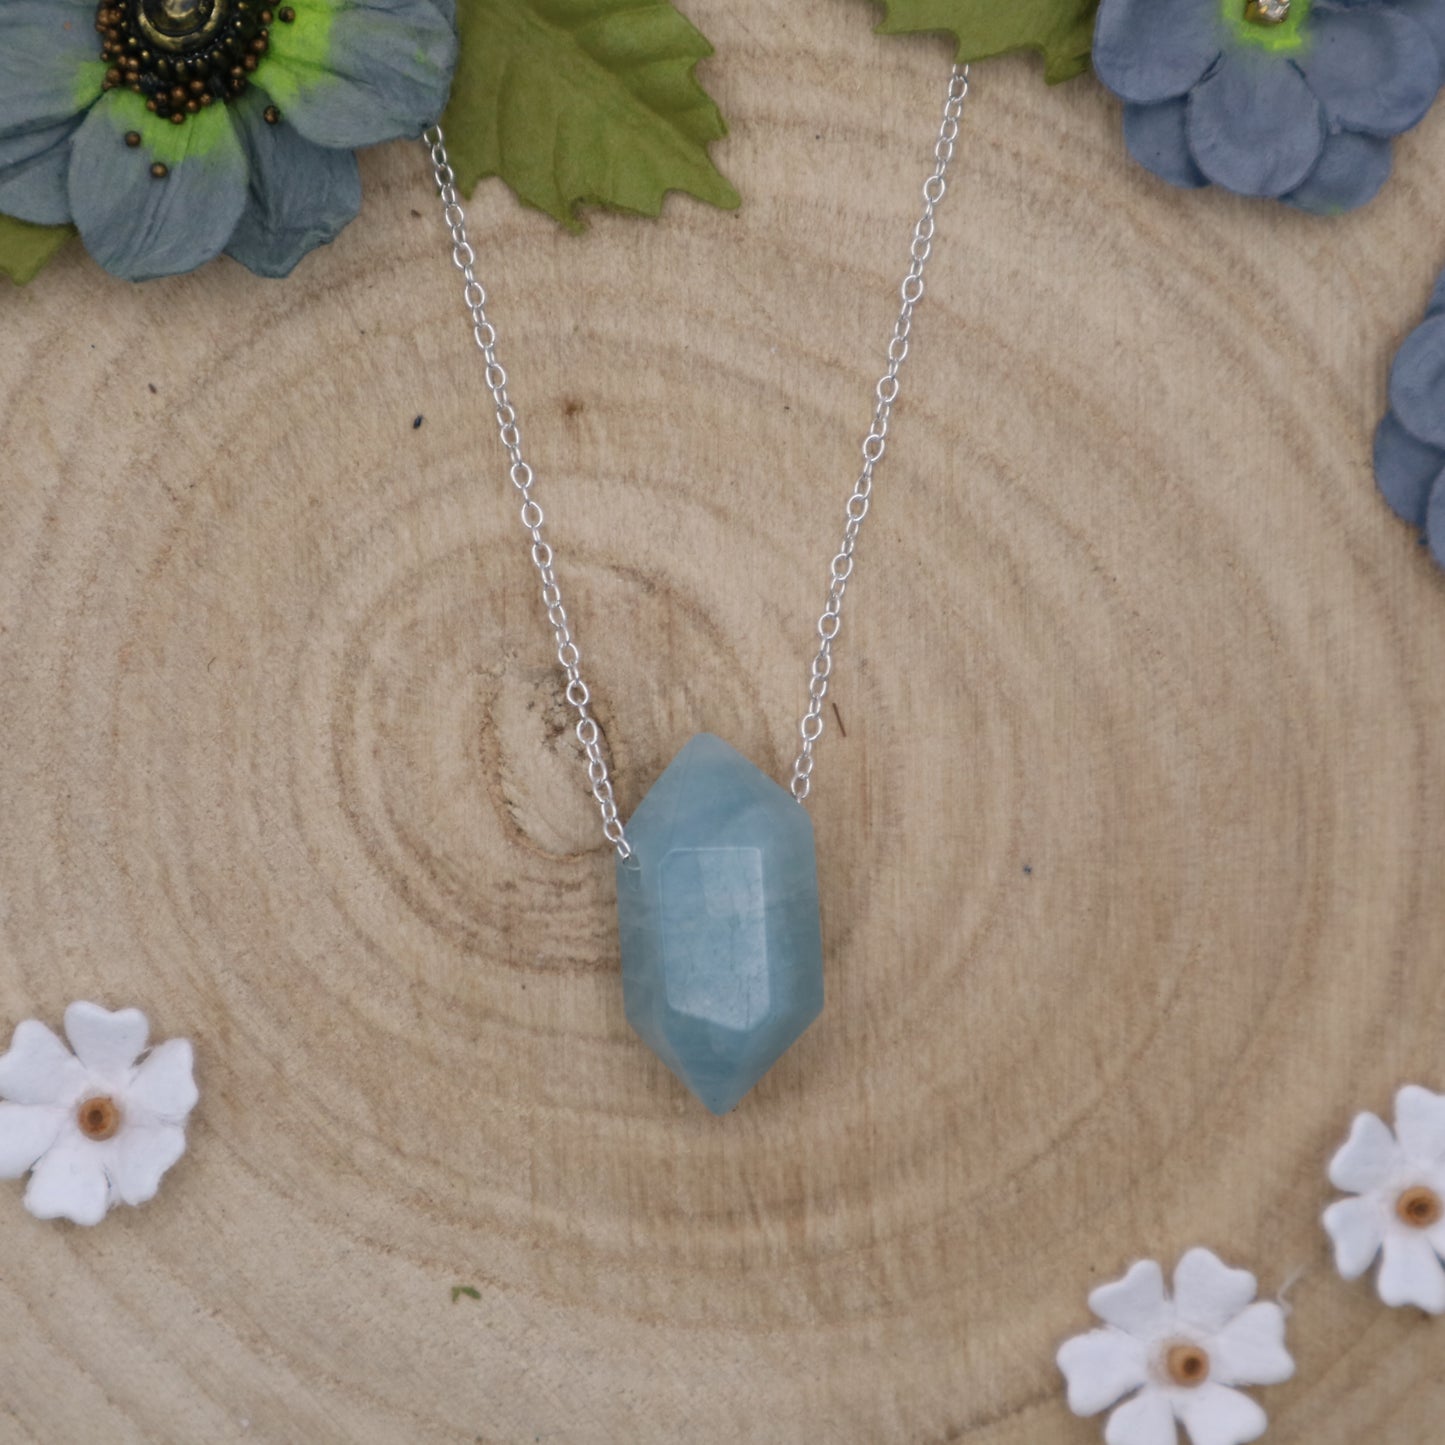 Small Aquamarine crystal on sterling silver fine necklace chain